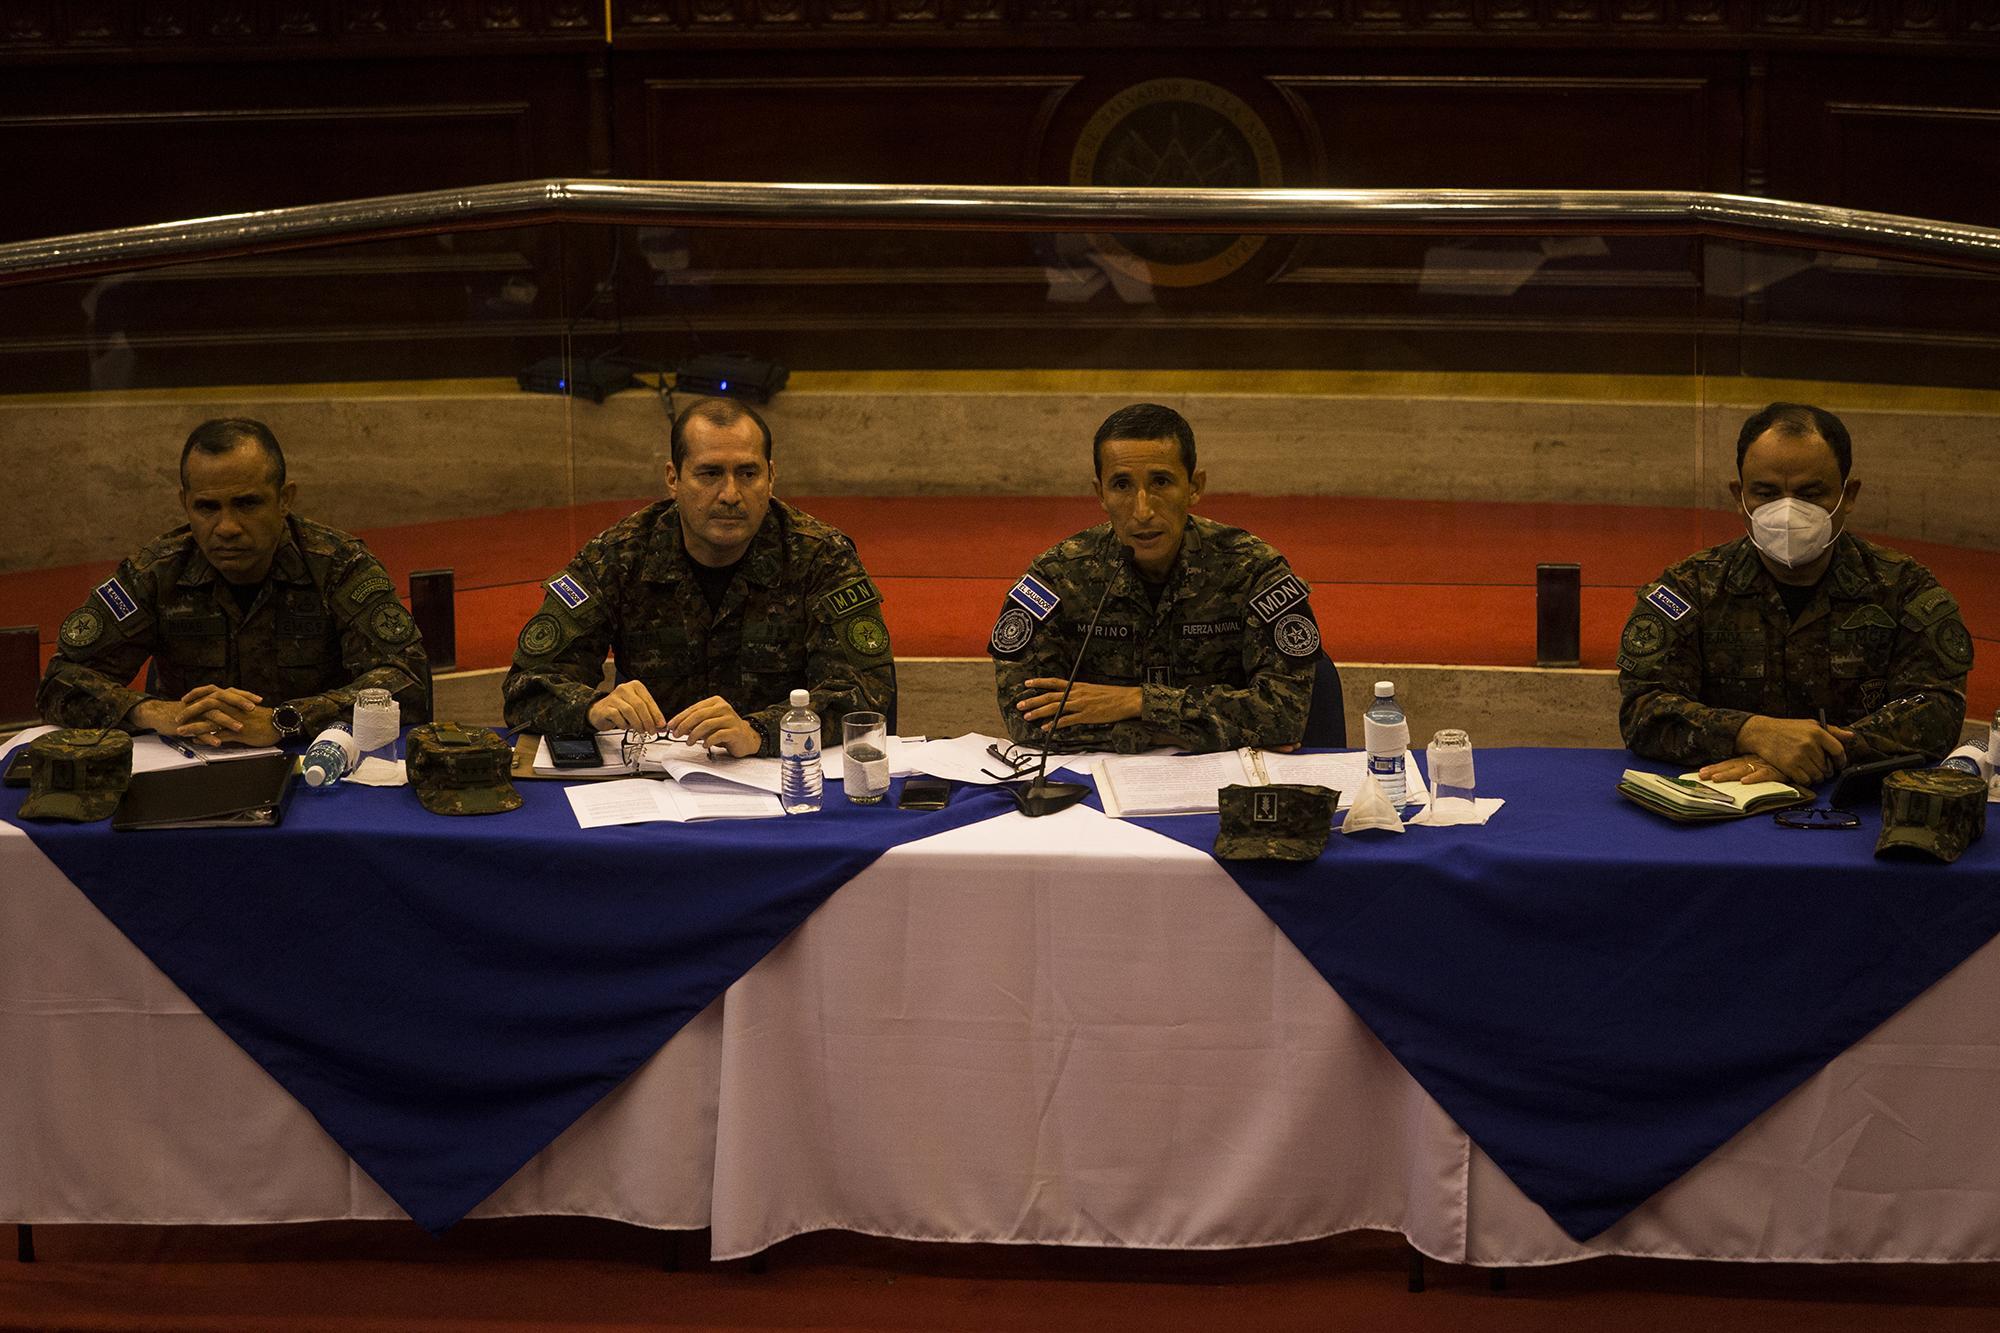 Francis Merino Monroy during a congressional hearing. The Minister of Defense seated between generals to respond to questions about the military presence in the hall of the Legislative Assembly this February 9. Photo from El Faro: Víctor Peña.